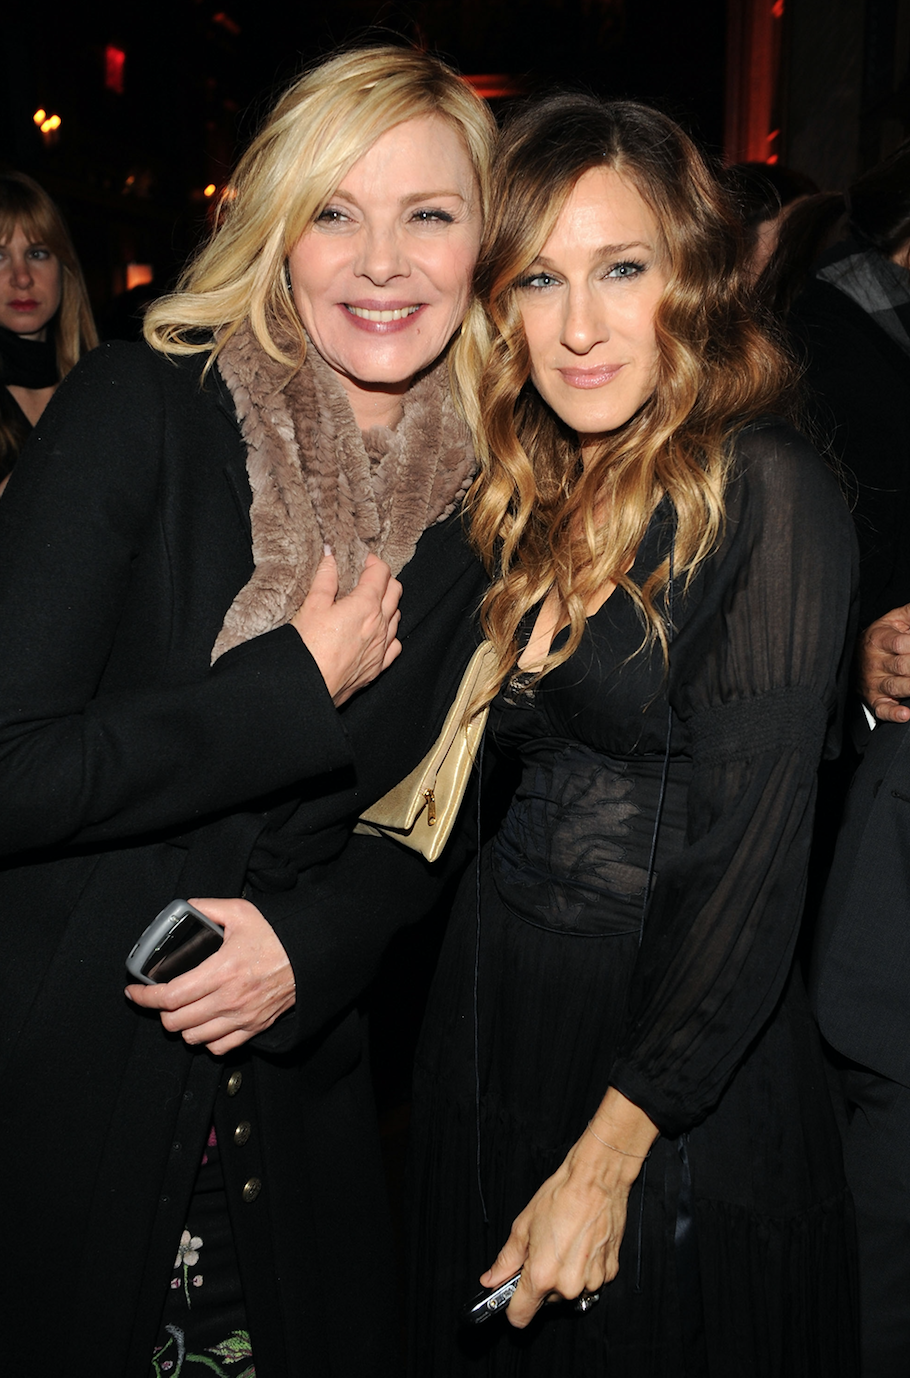 kim cattrall and sarah jessica parker attend the premiere of 'did you hear about the morgans'